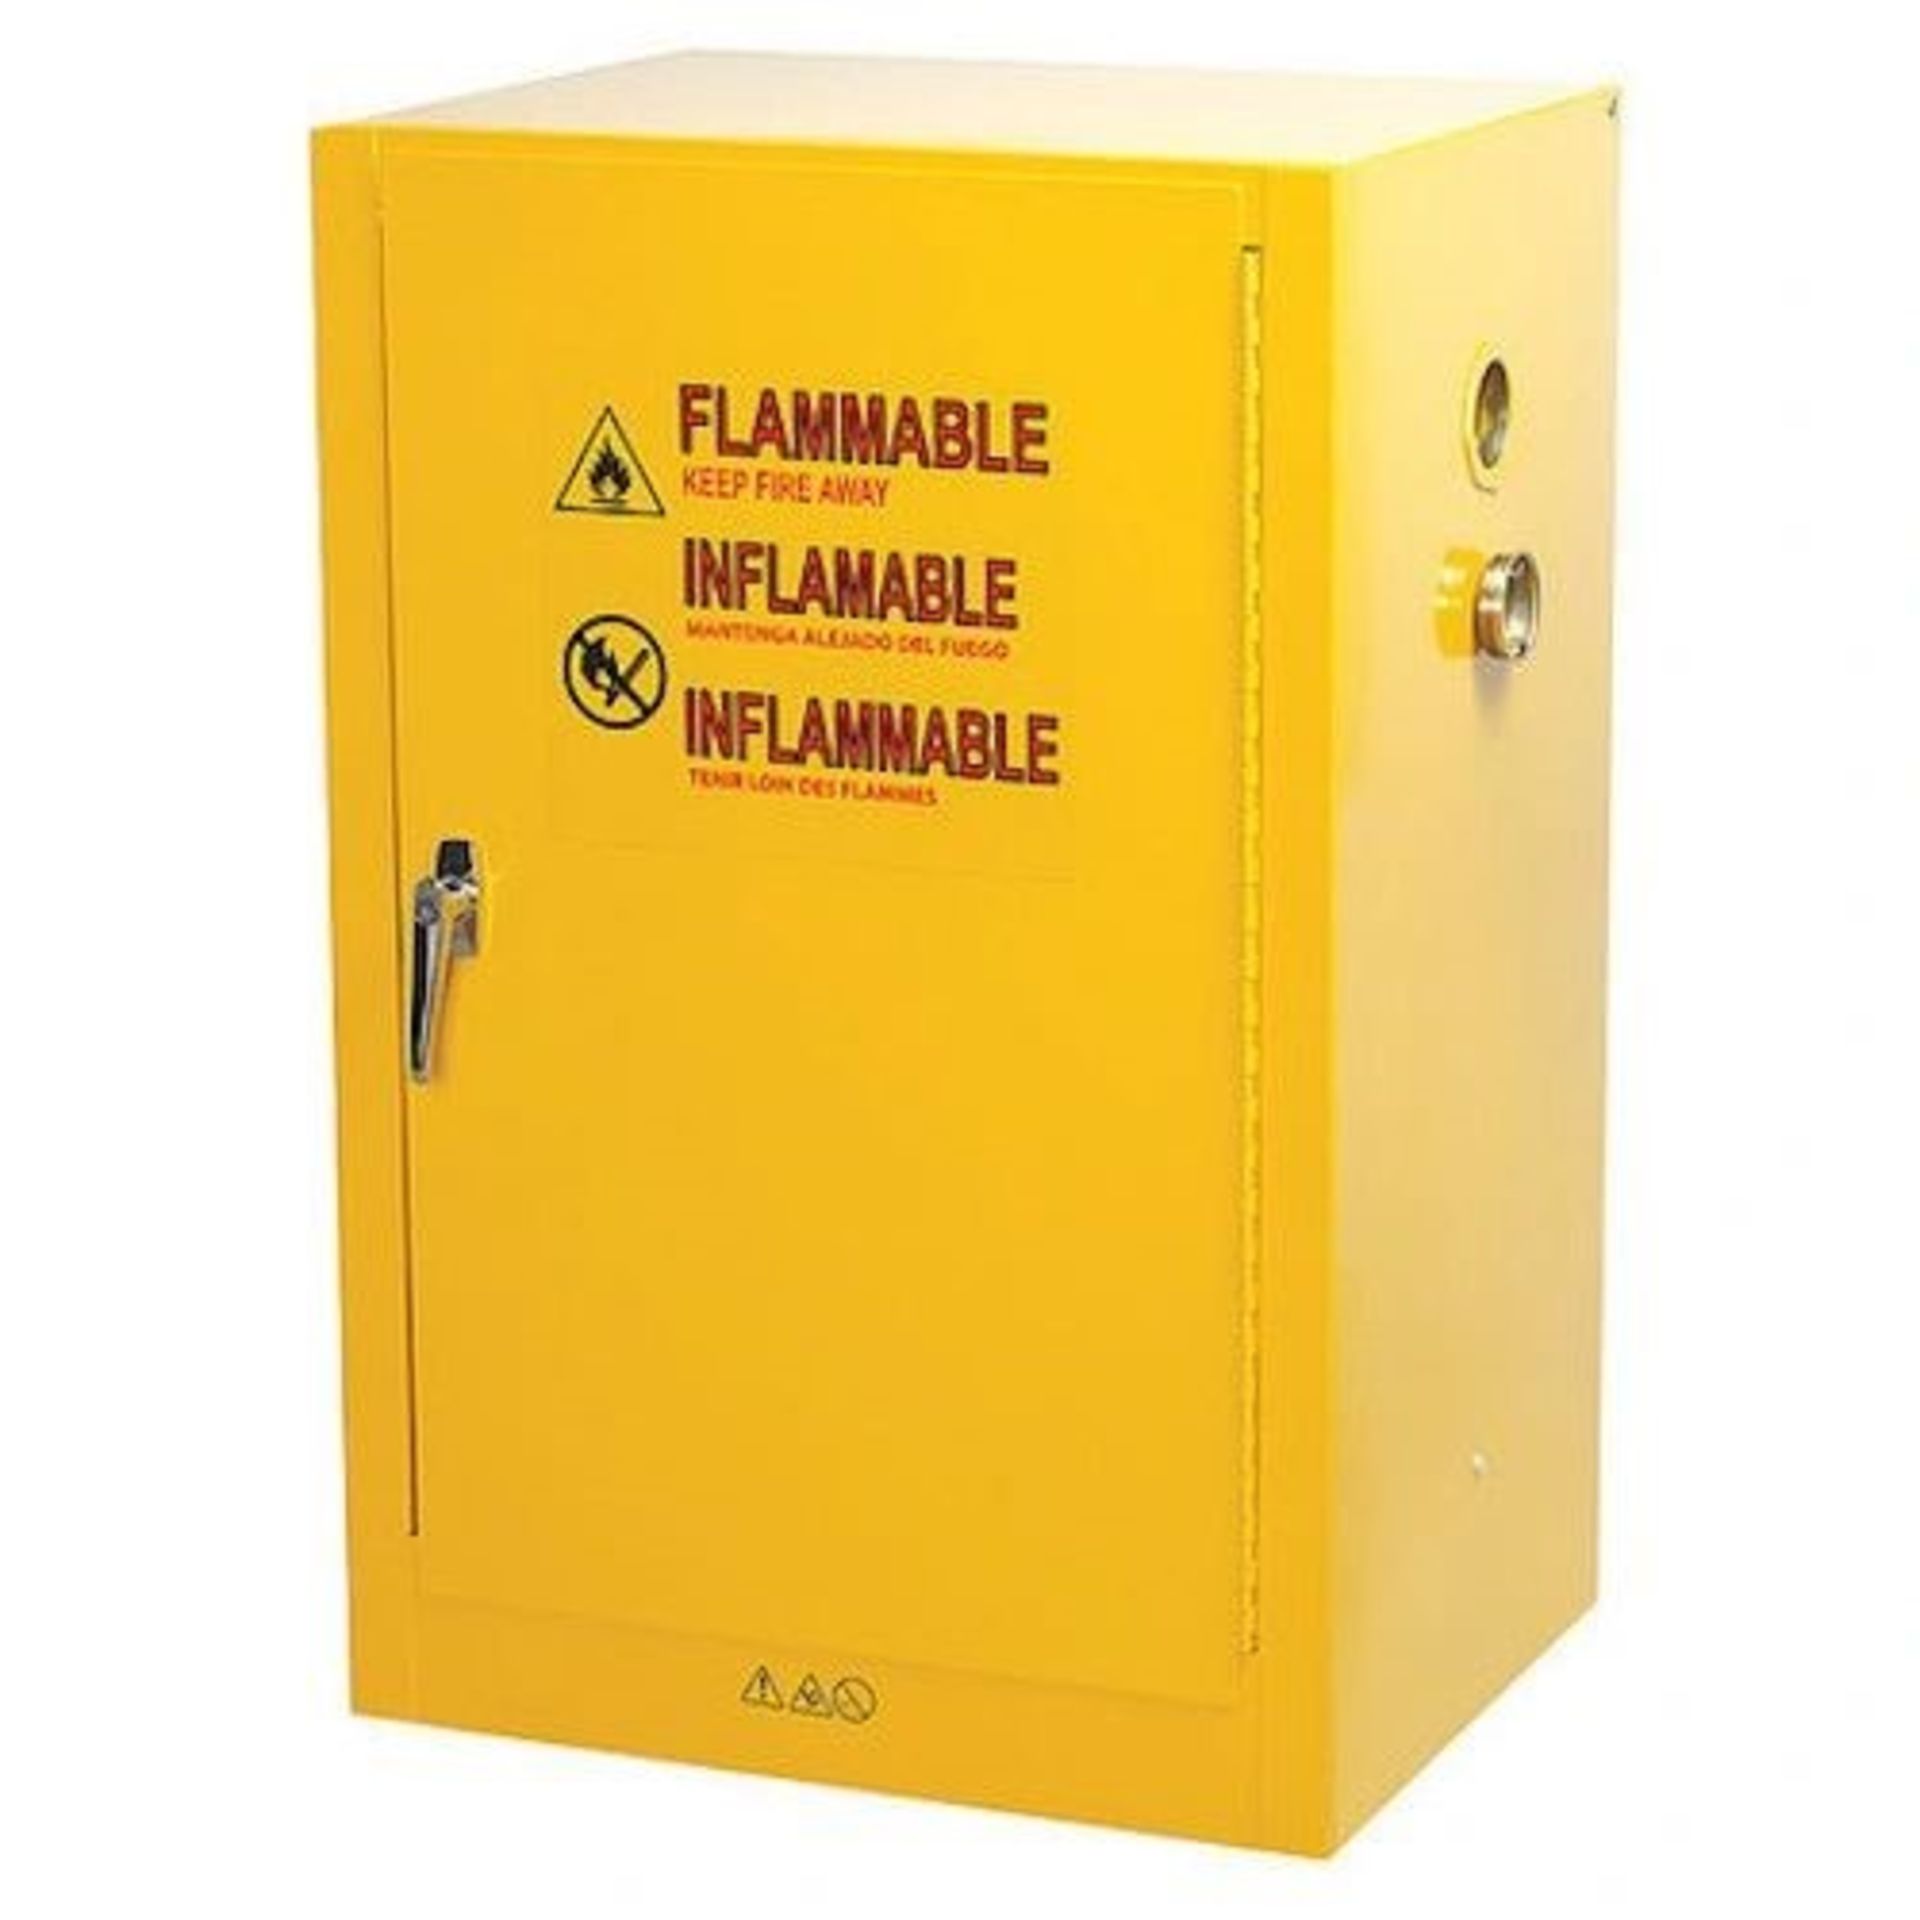 CONDOR 12 GALLON FLAMEPROOF SAFETY CABINET M/N 42X503 - Image 2 of 3